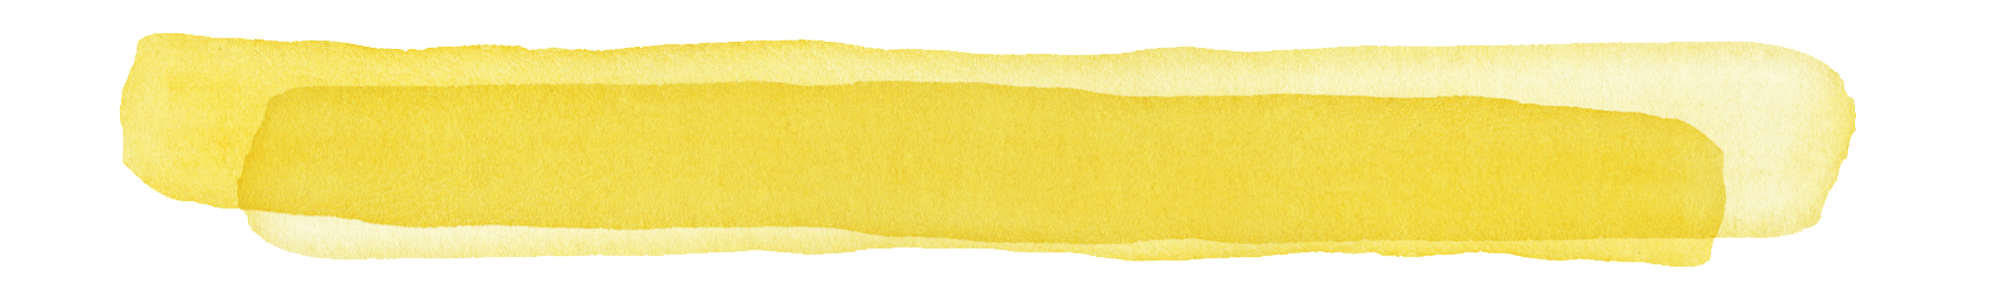 background swatch yellow